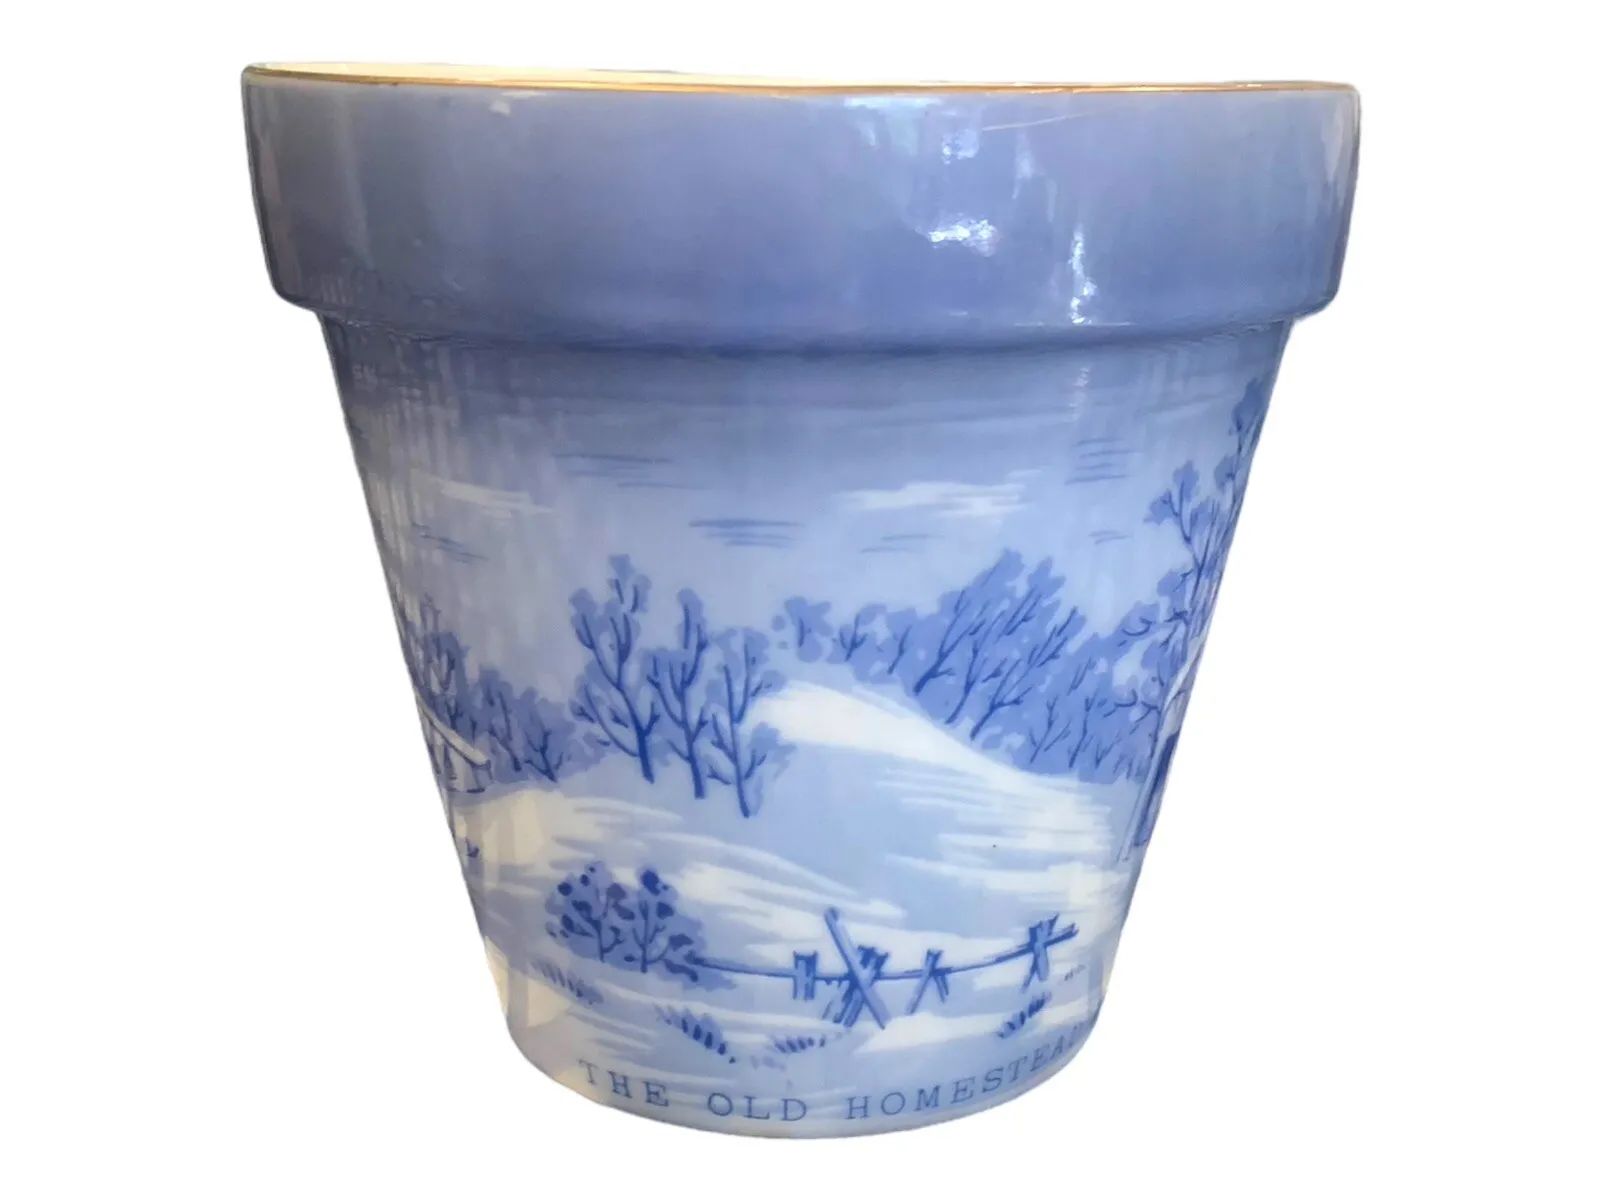 Vintage Currier & Ives Blue and White Homestead in Winter Mini Pot Planter | eBay US